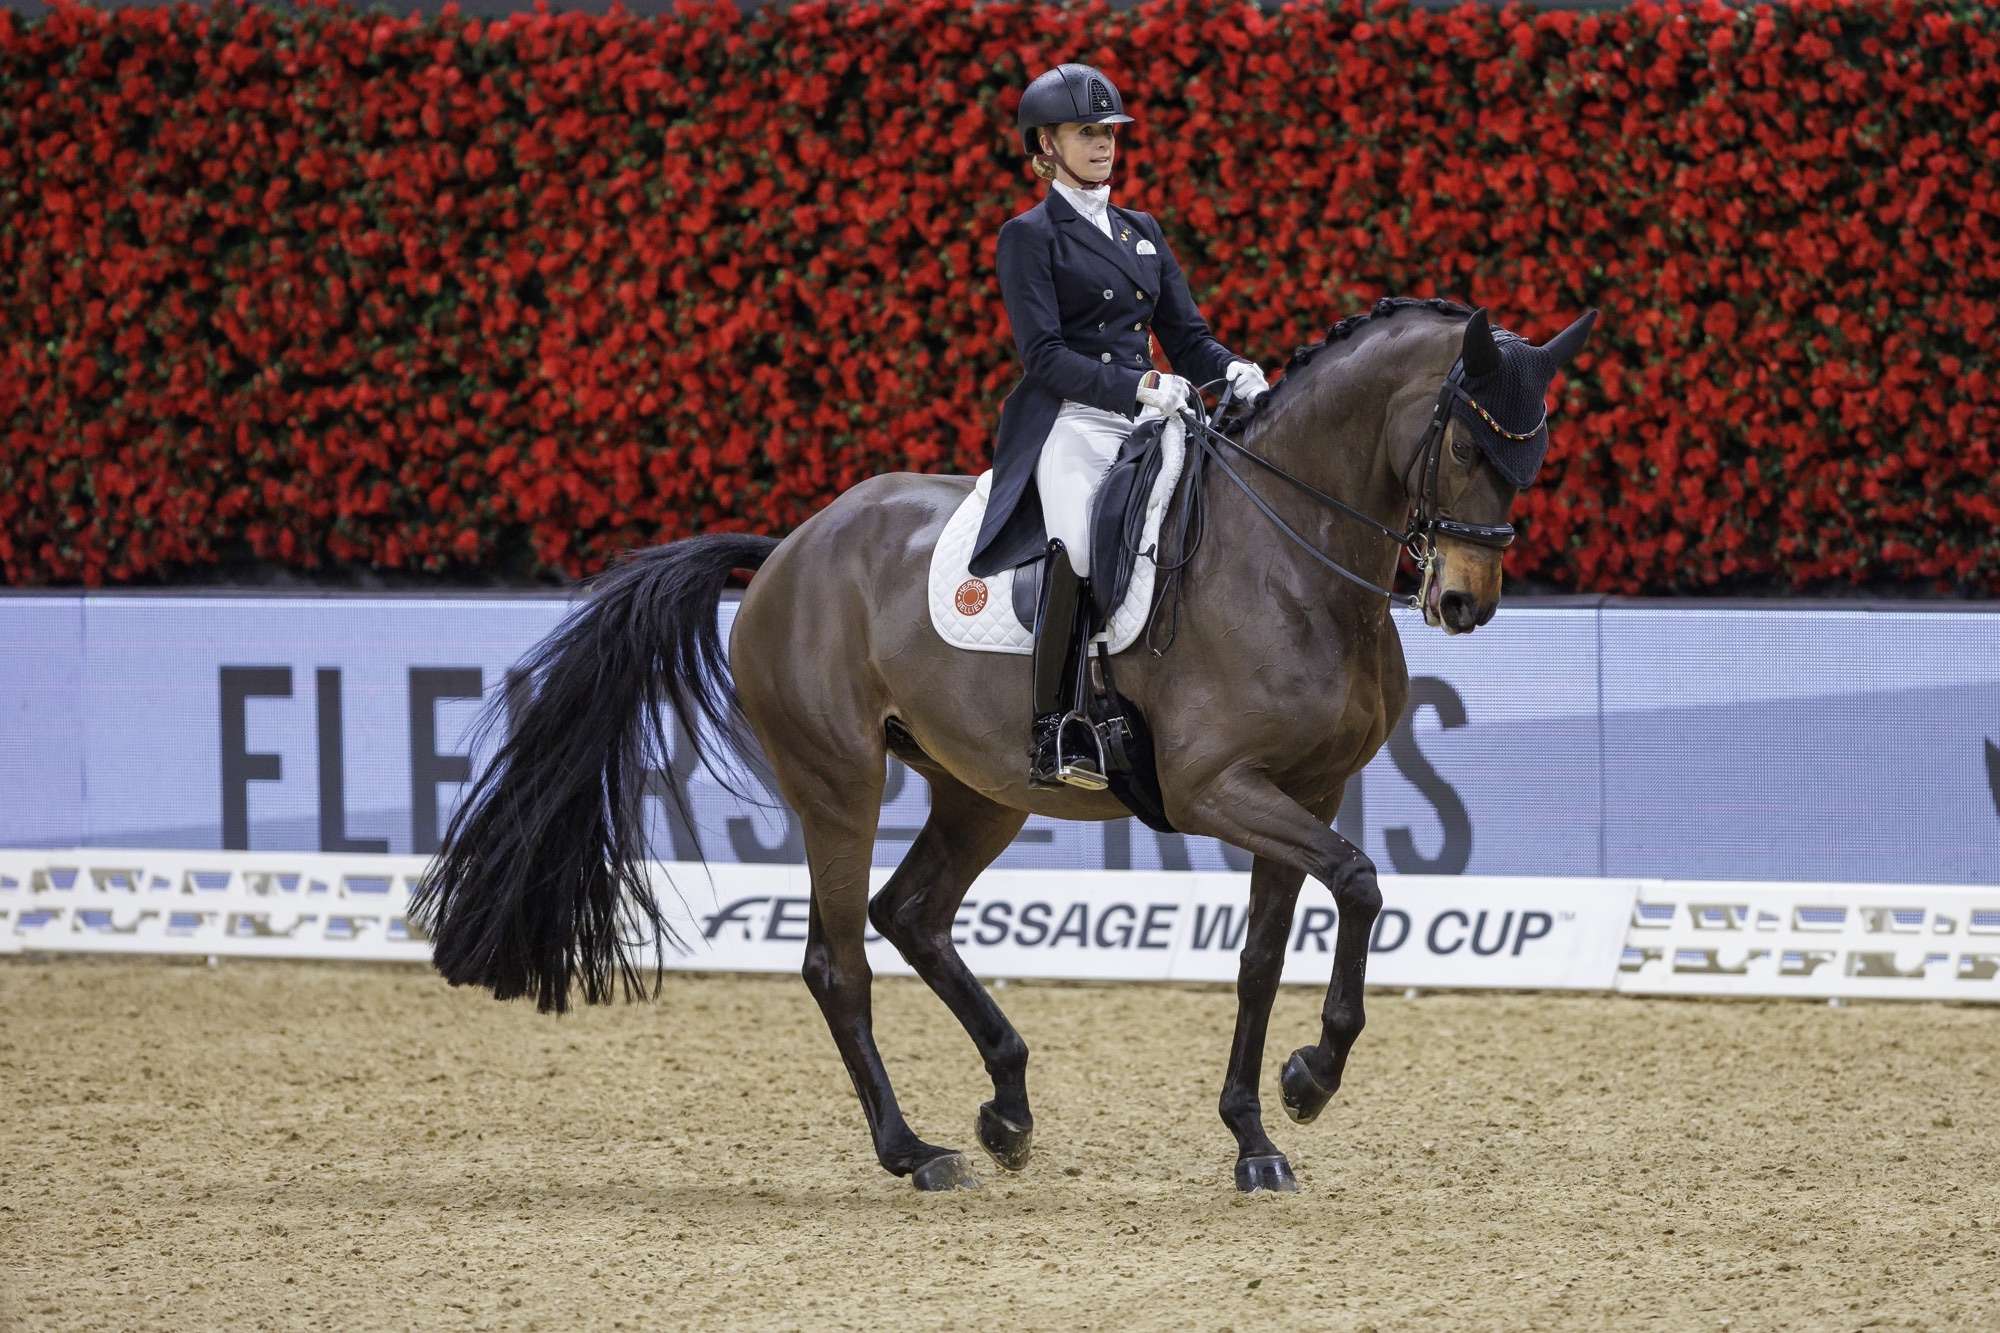 The reigning series champions, Germany’s Jessica von Bredow-Werndl and TSF Dalera BB, posted their second victory of the current season at the seventh leg of the FEI Dressage World Cup™ 2022/2023 Western European League in Basel, Switzerland today. (FEI/Stefan Lafrentz)